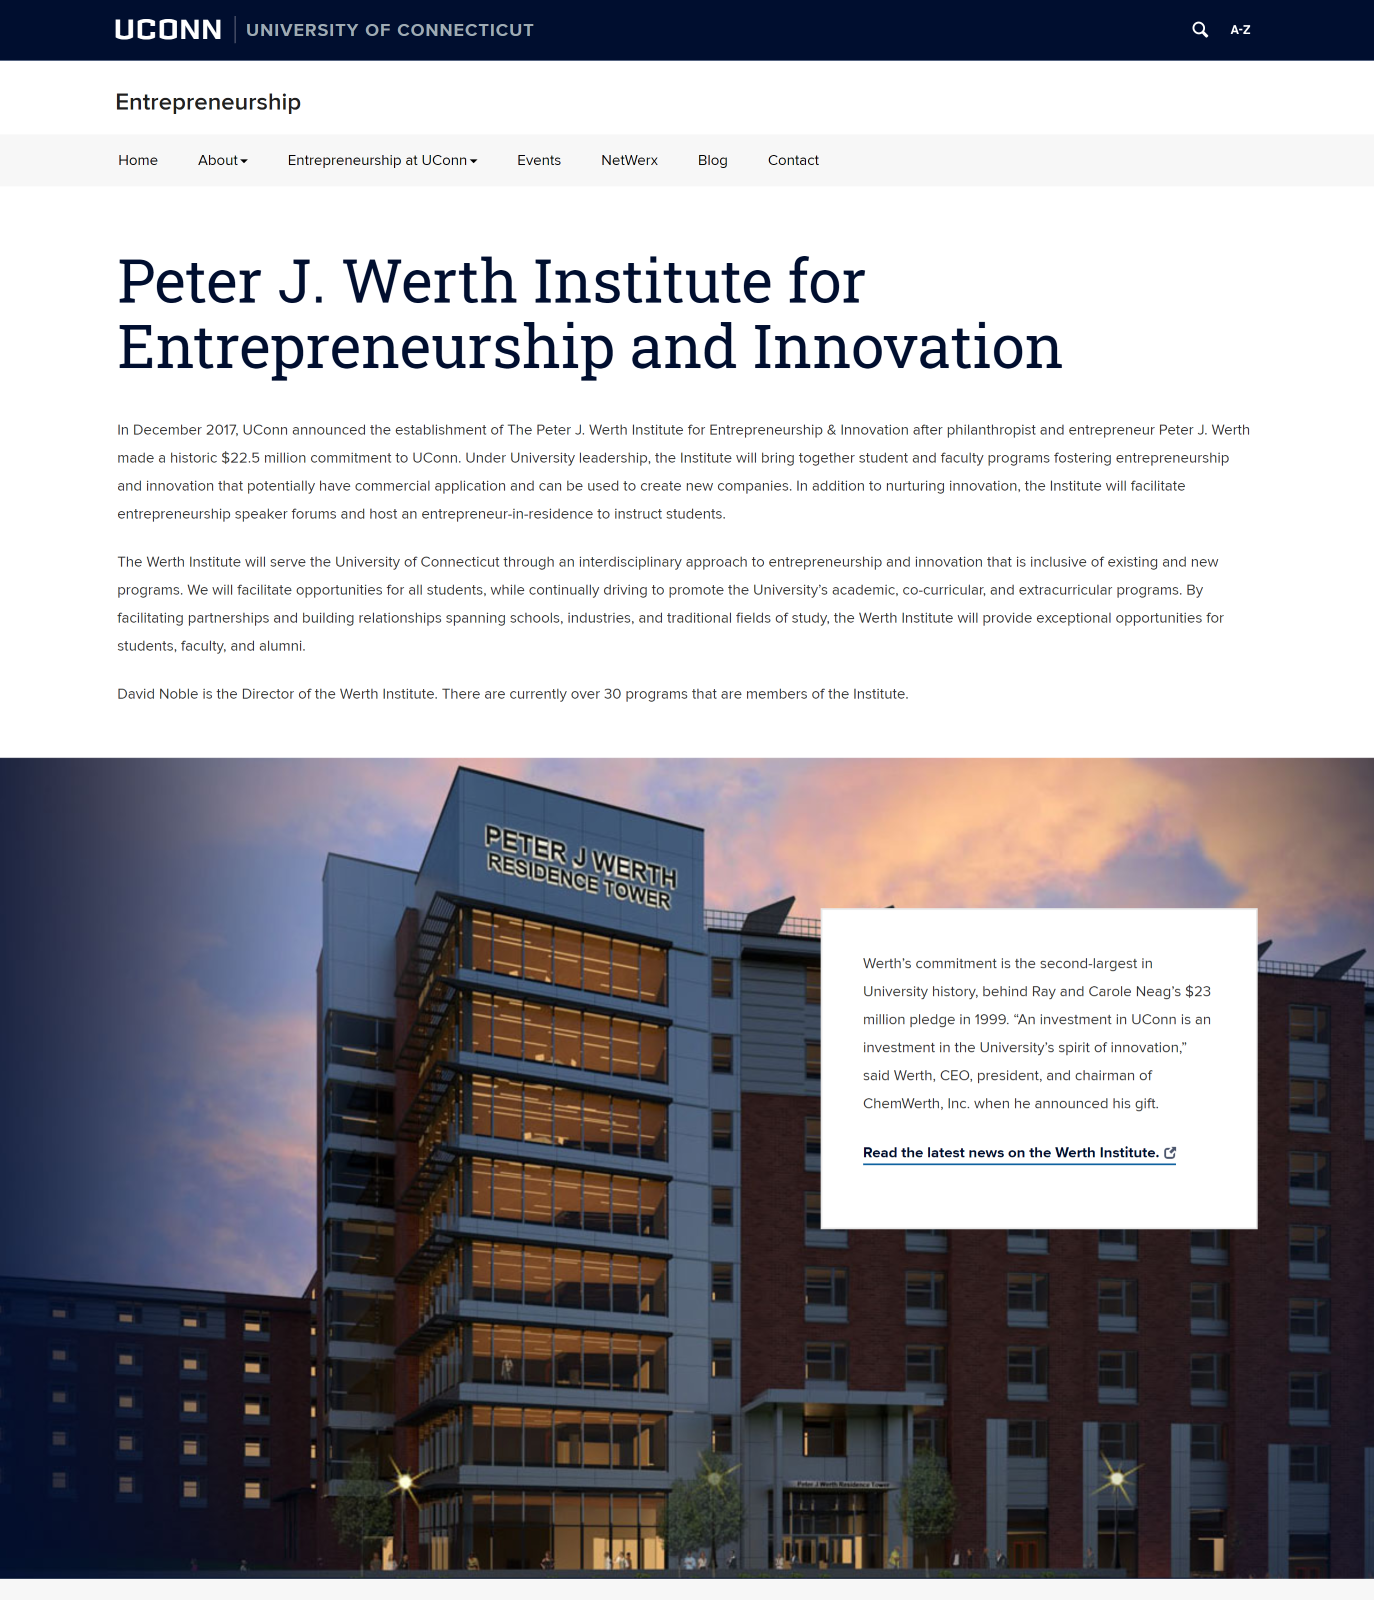 Screenshot of an interior page of the Entrepreneurship website